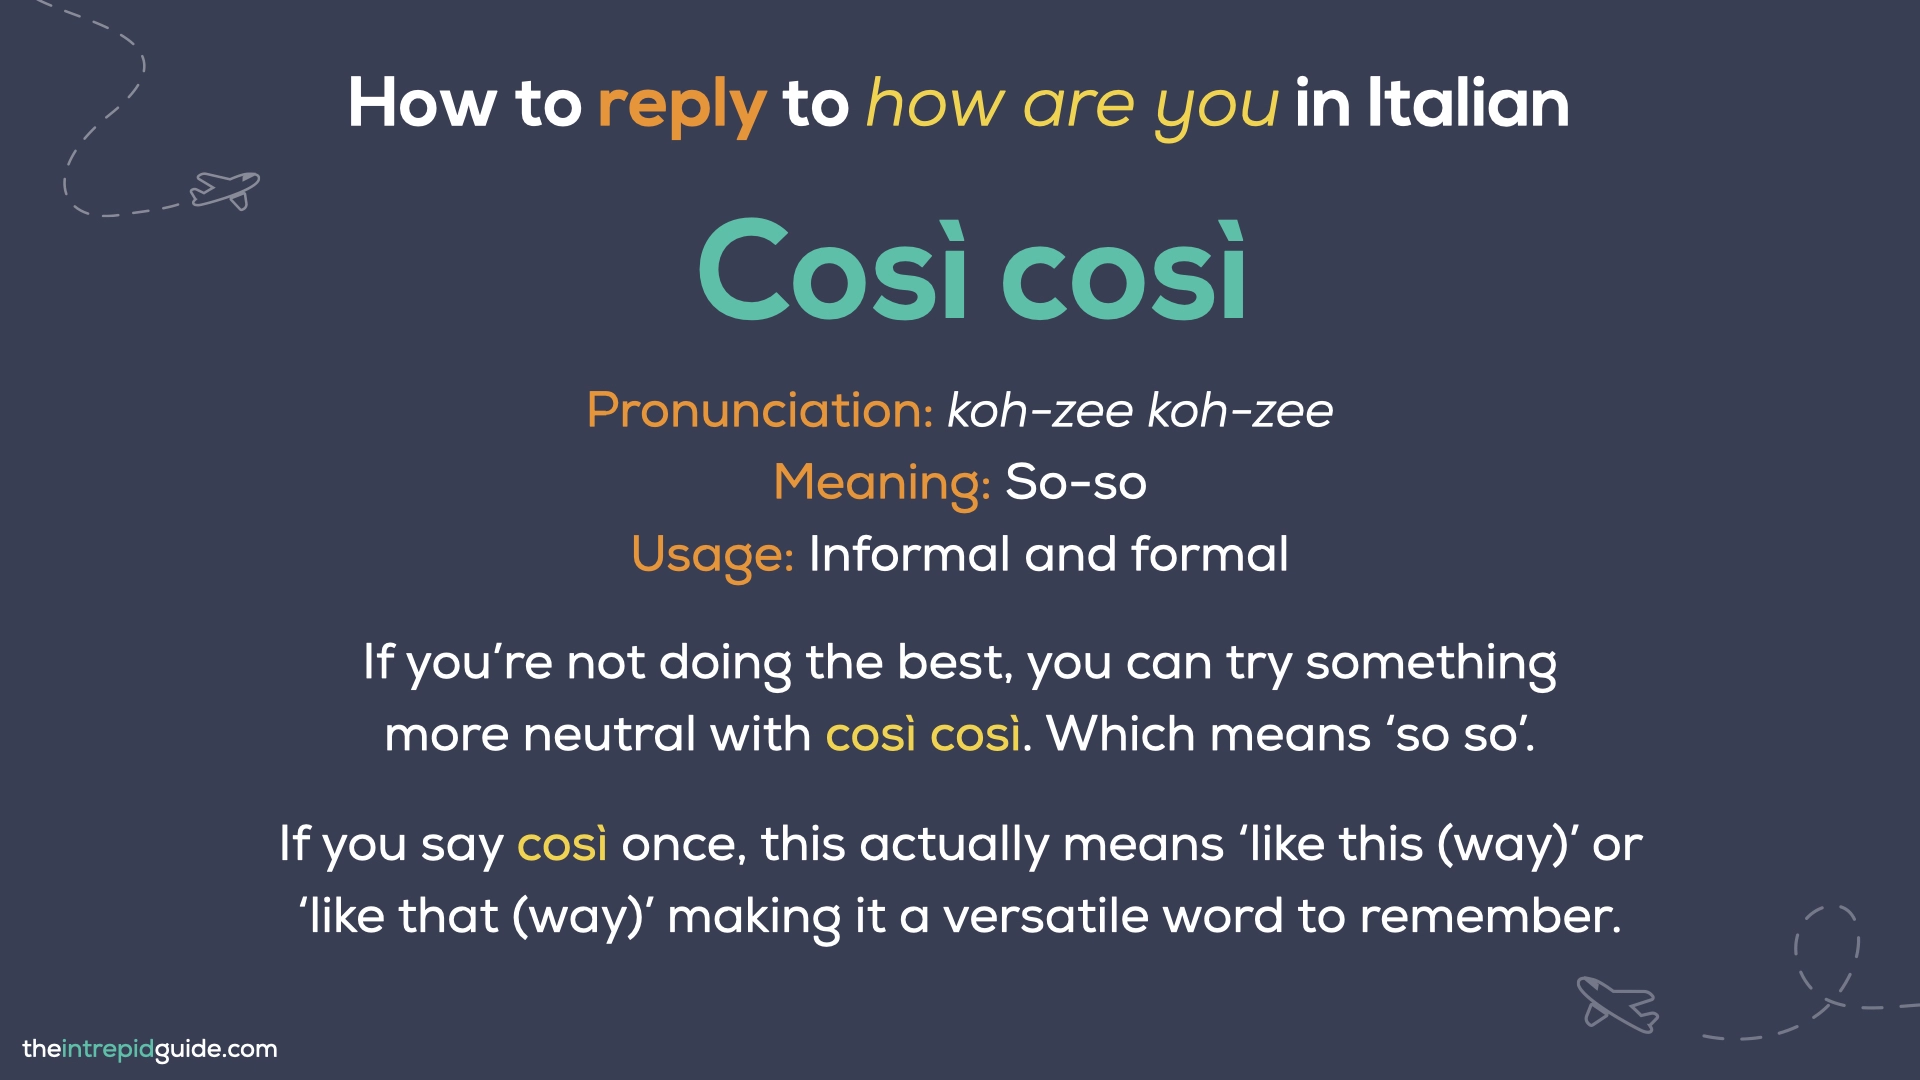 How to say How are you in Italian - Così così